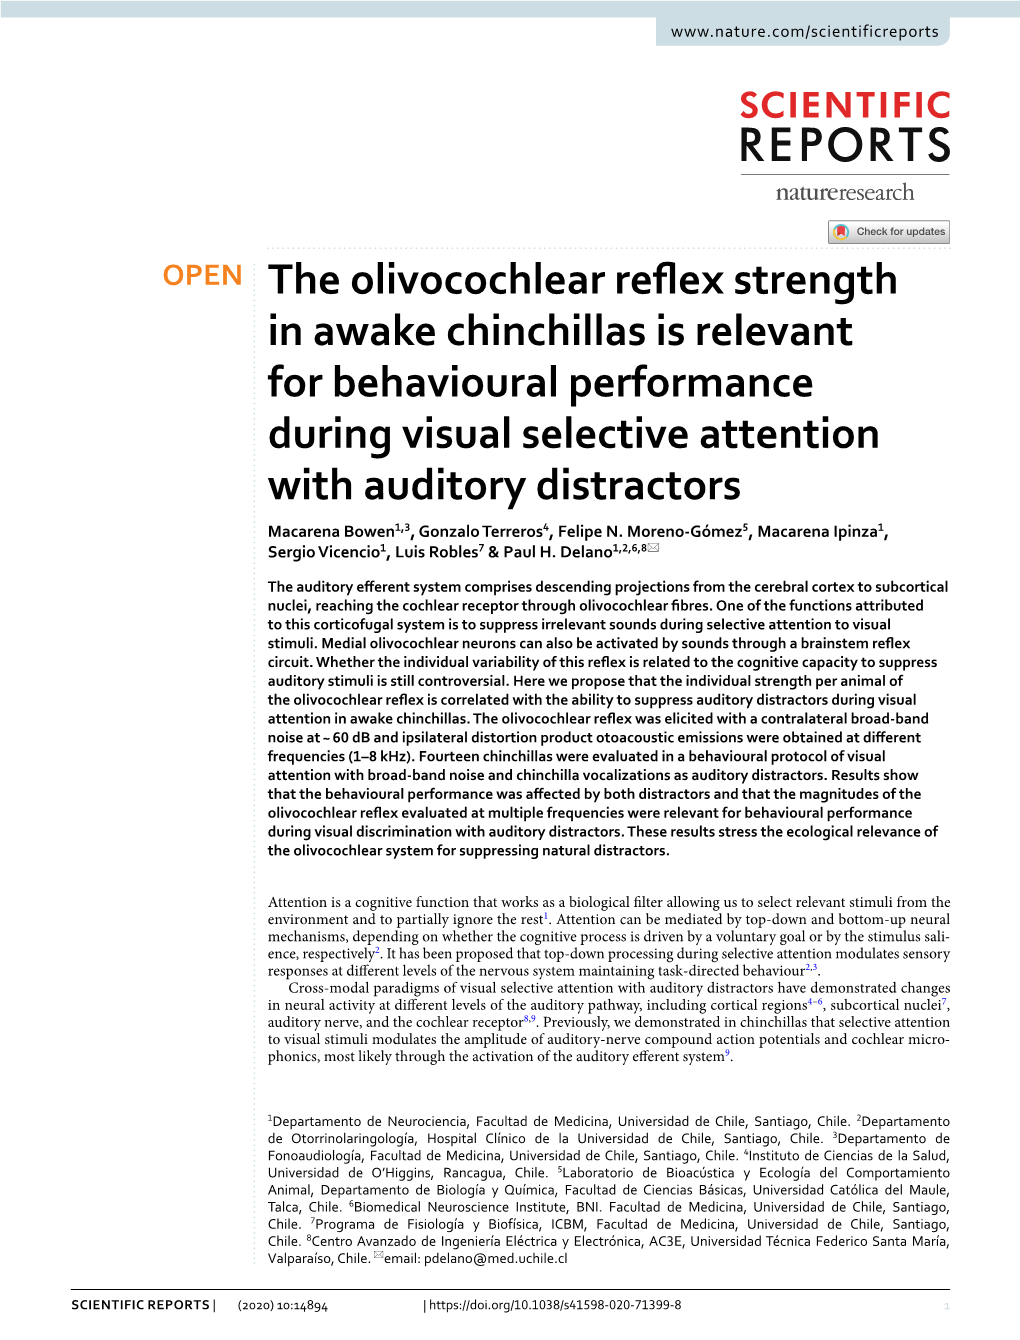 The Olivocochlear Reflex Strength in Awake Chinchillas Is Relevant For